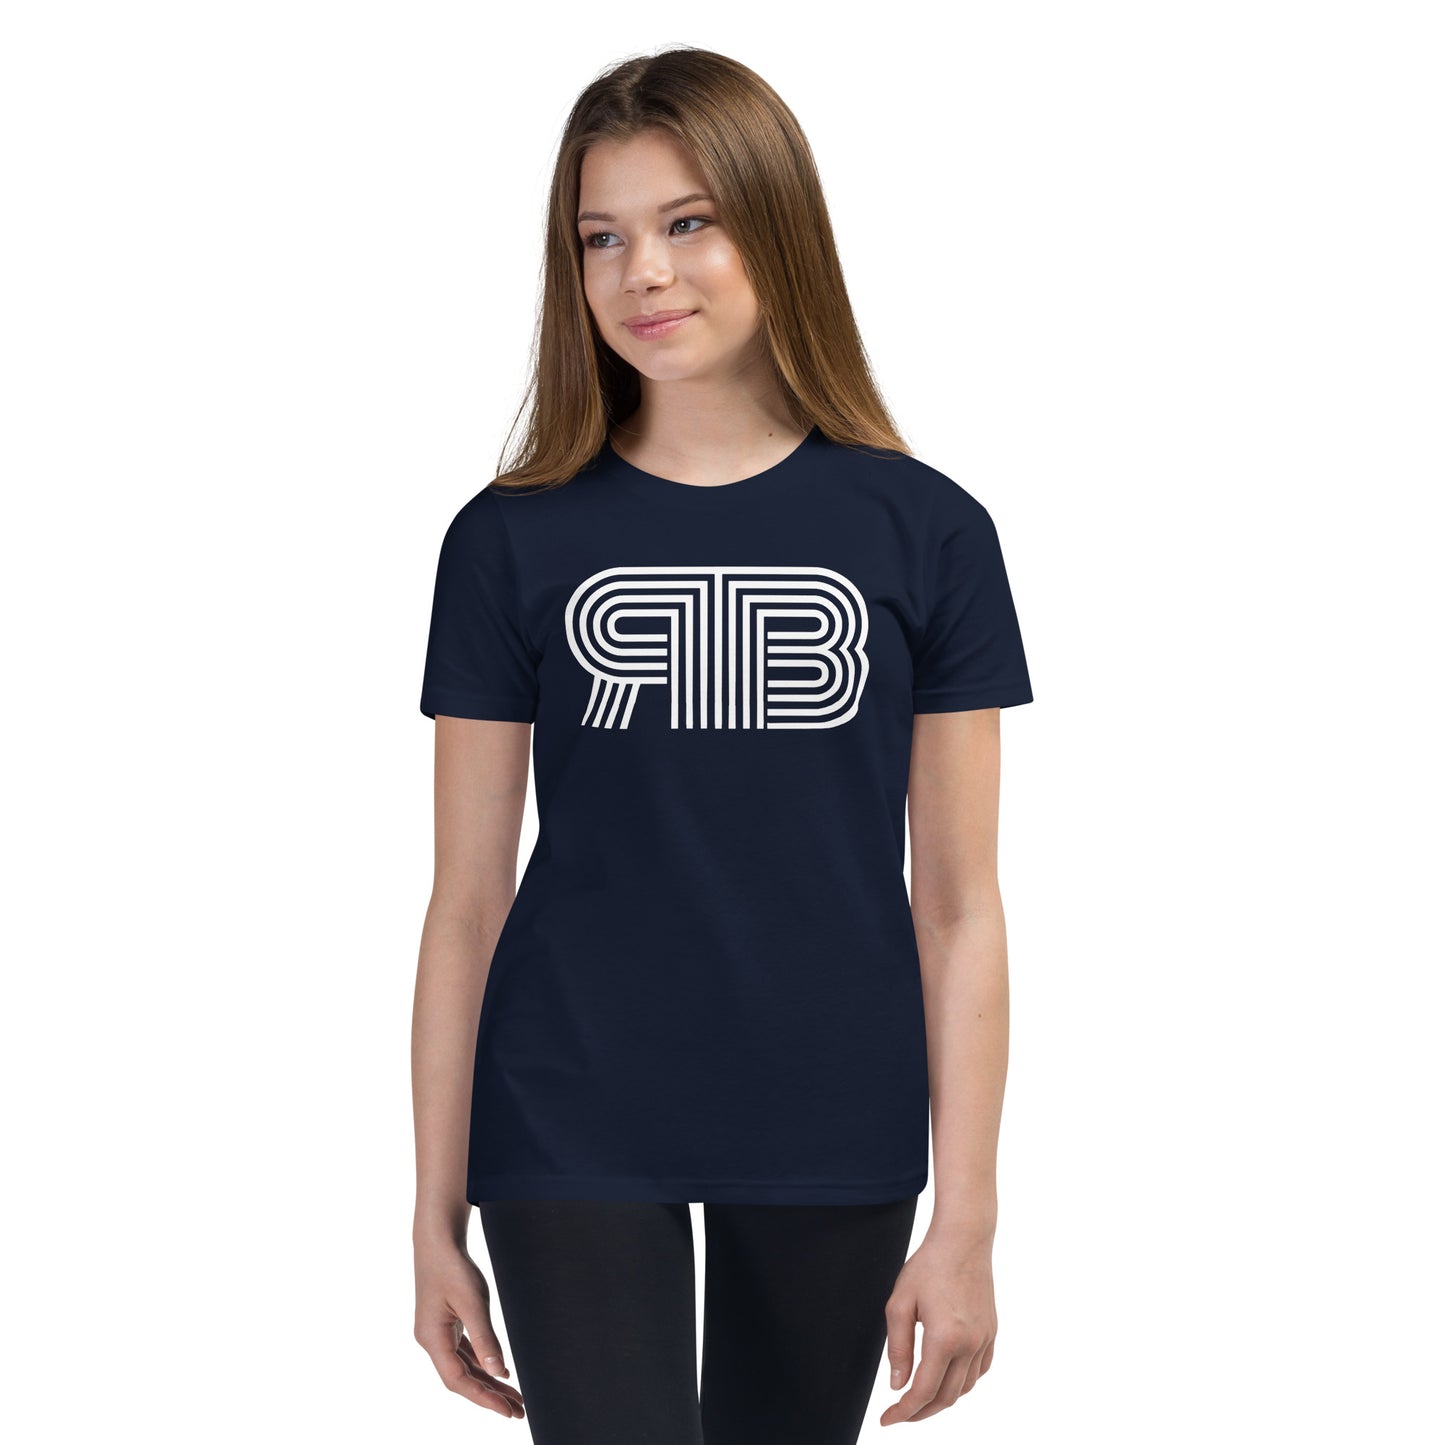 RB Youth T-Shirt